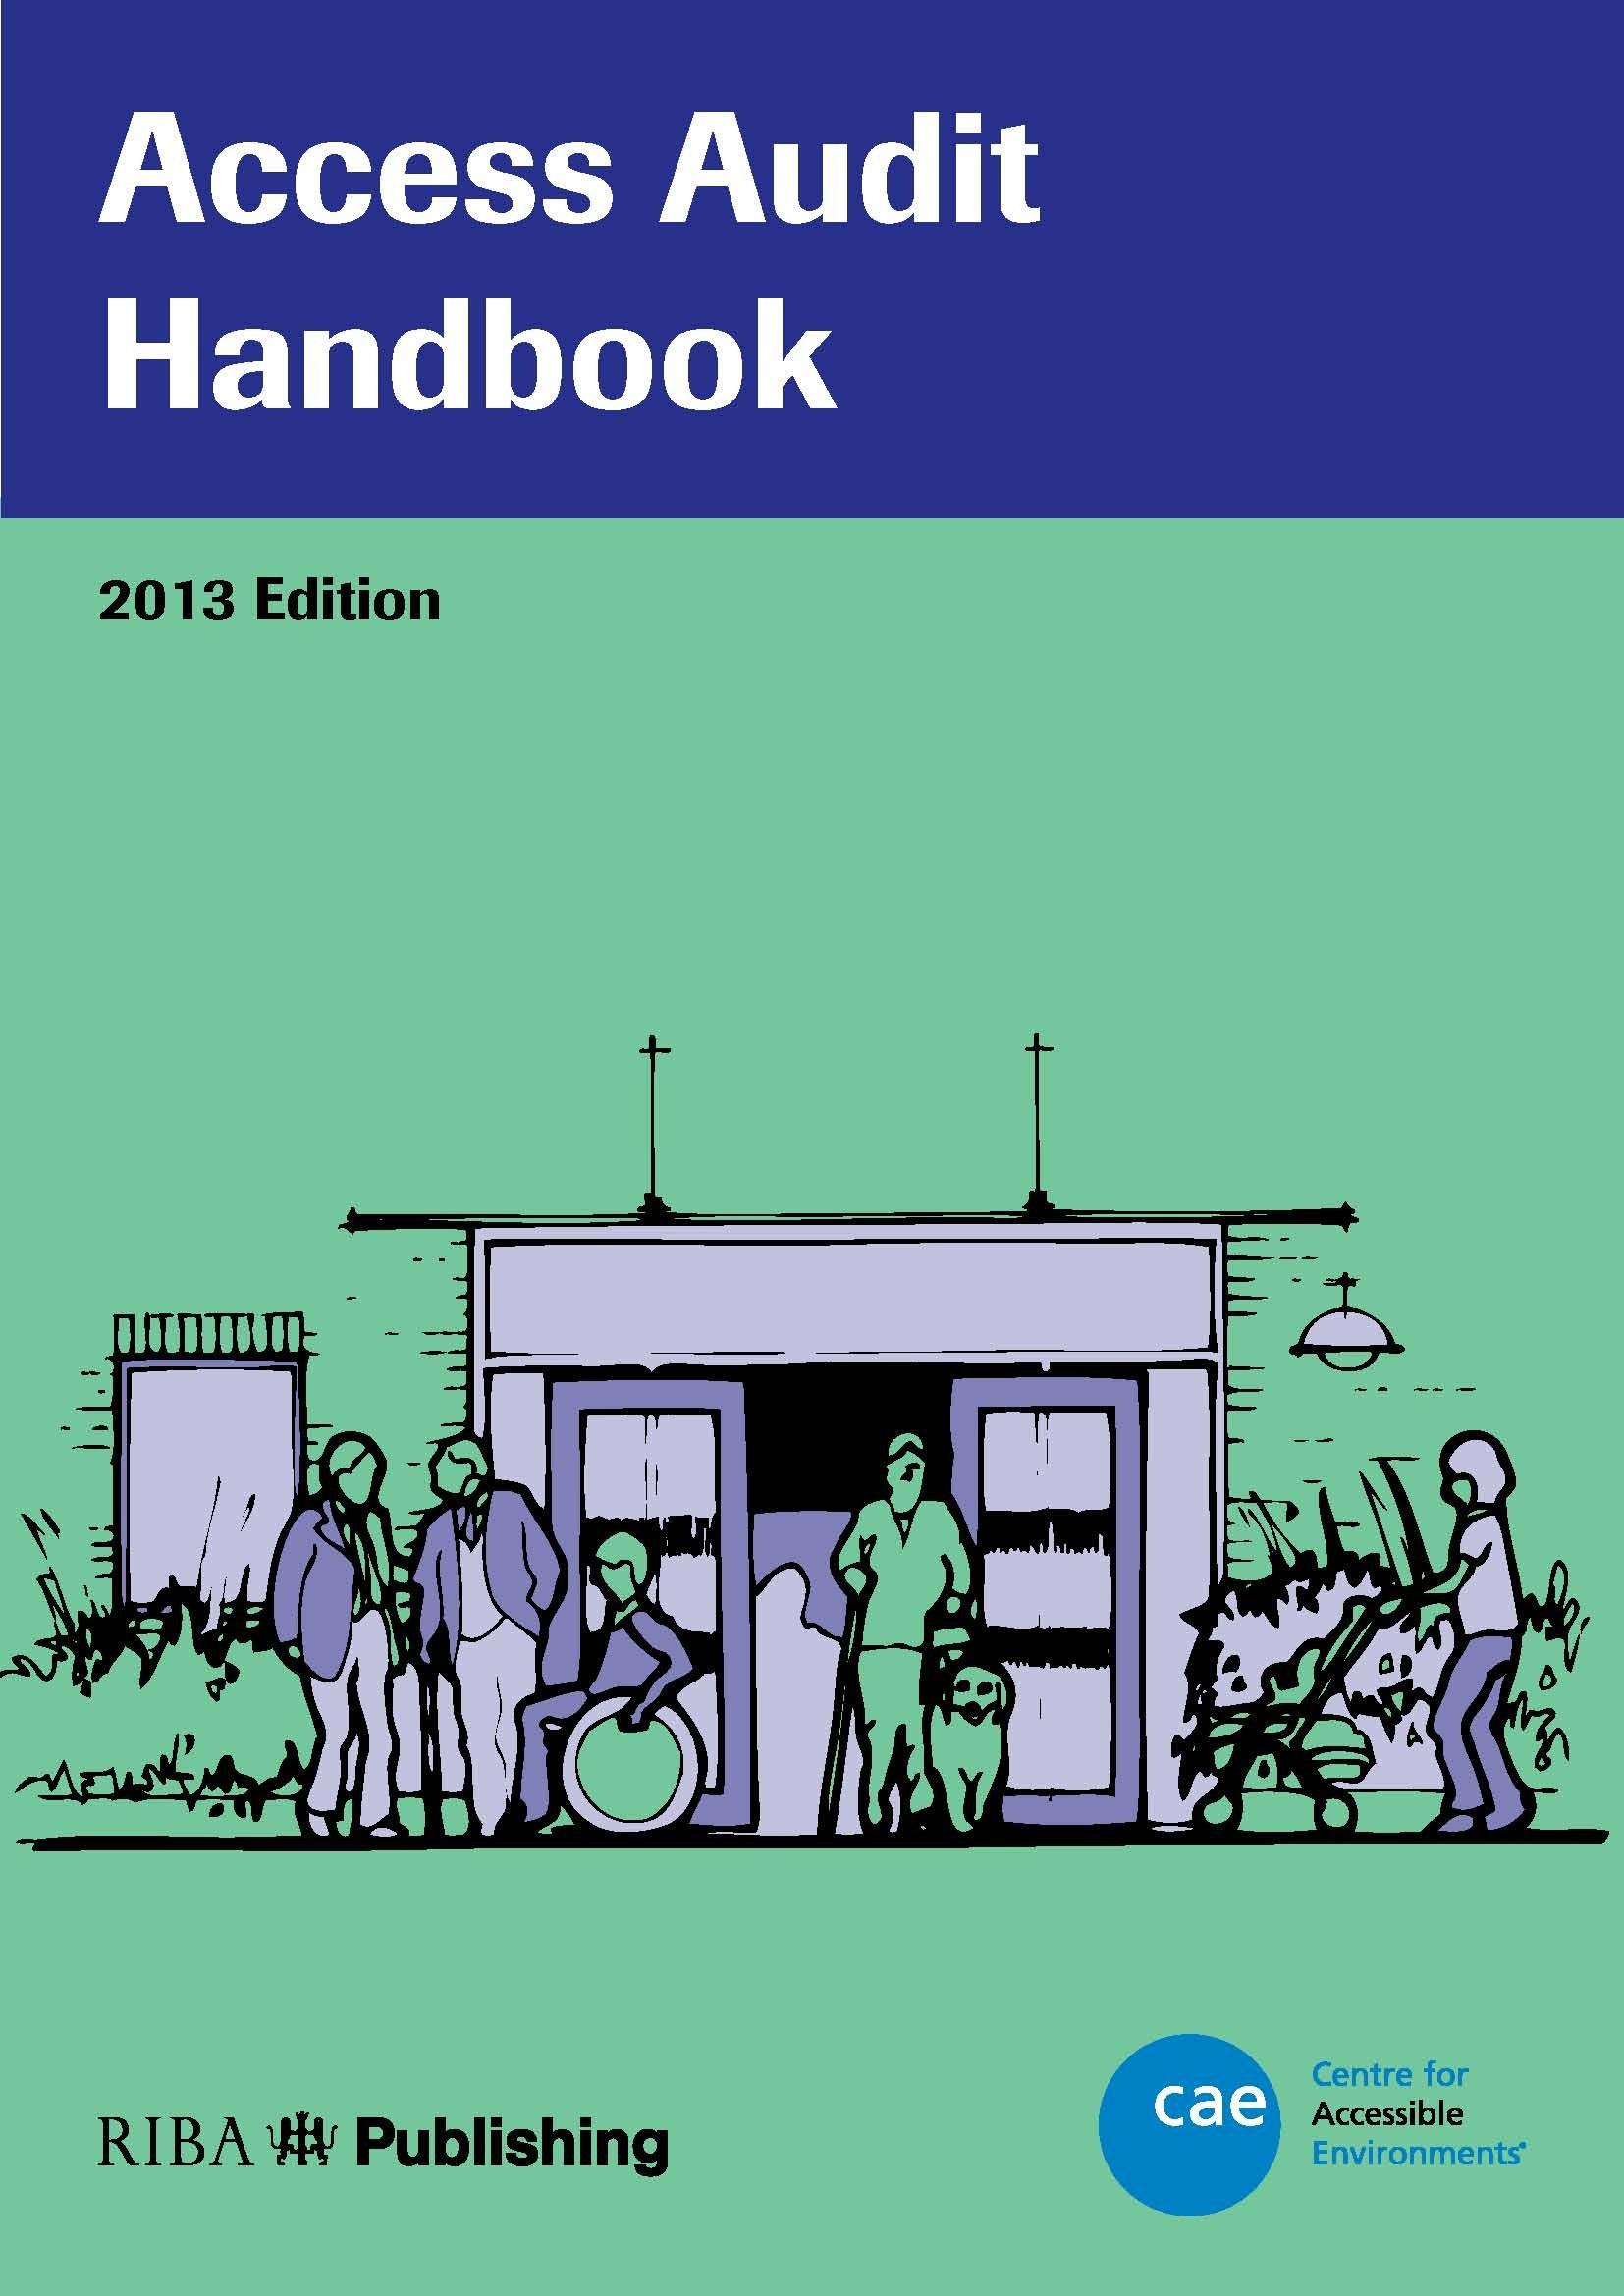 access audit handbook 2013th edition (cae) centre for accessible environments 1859464920, 978-1859464922